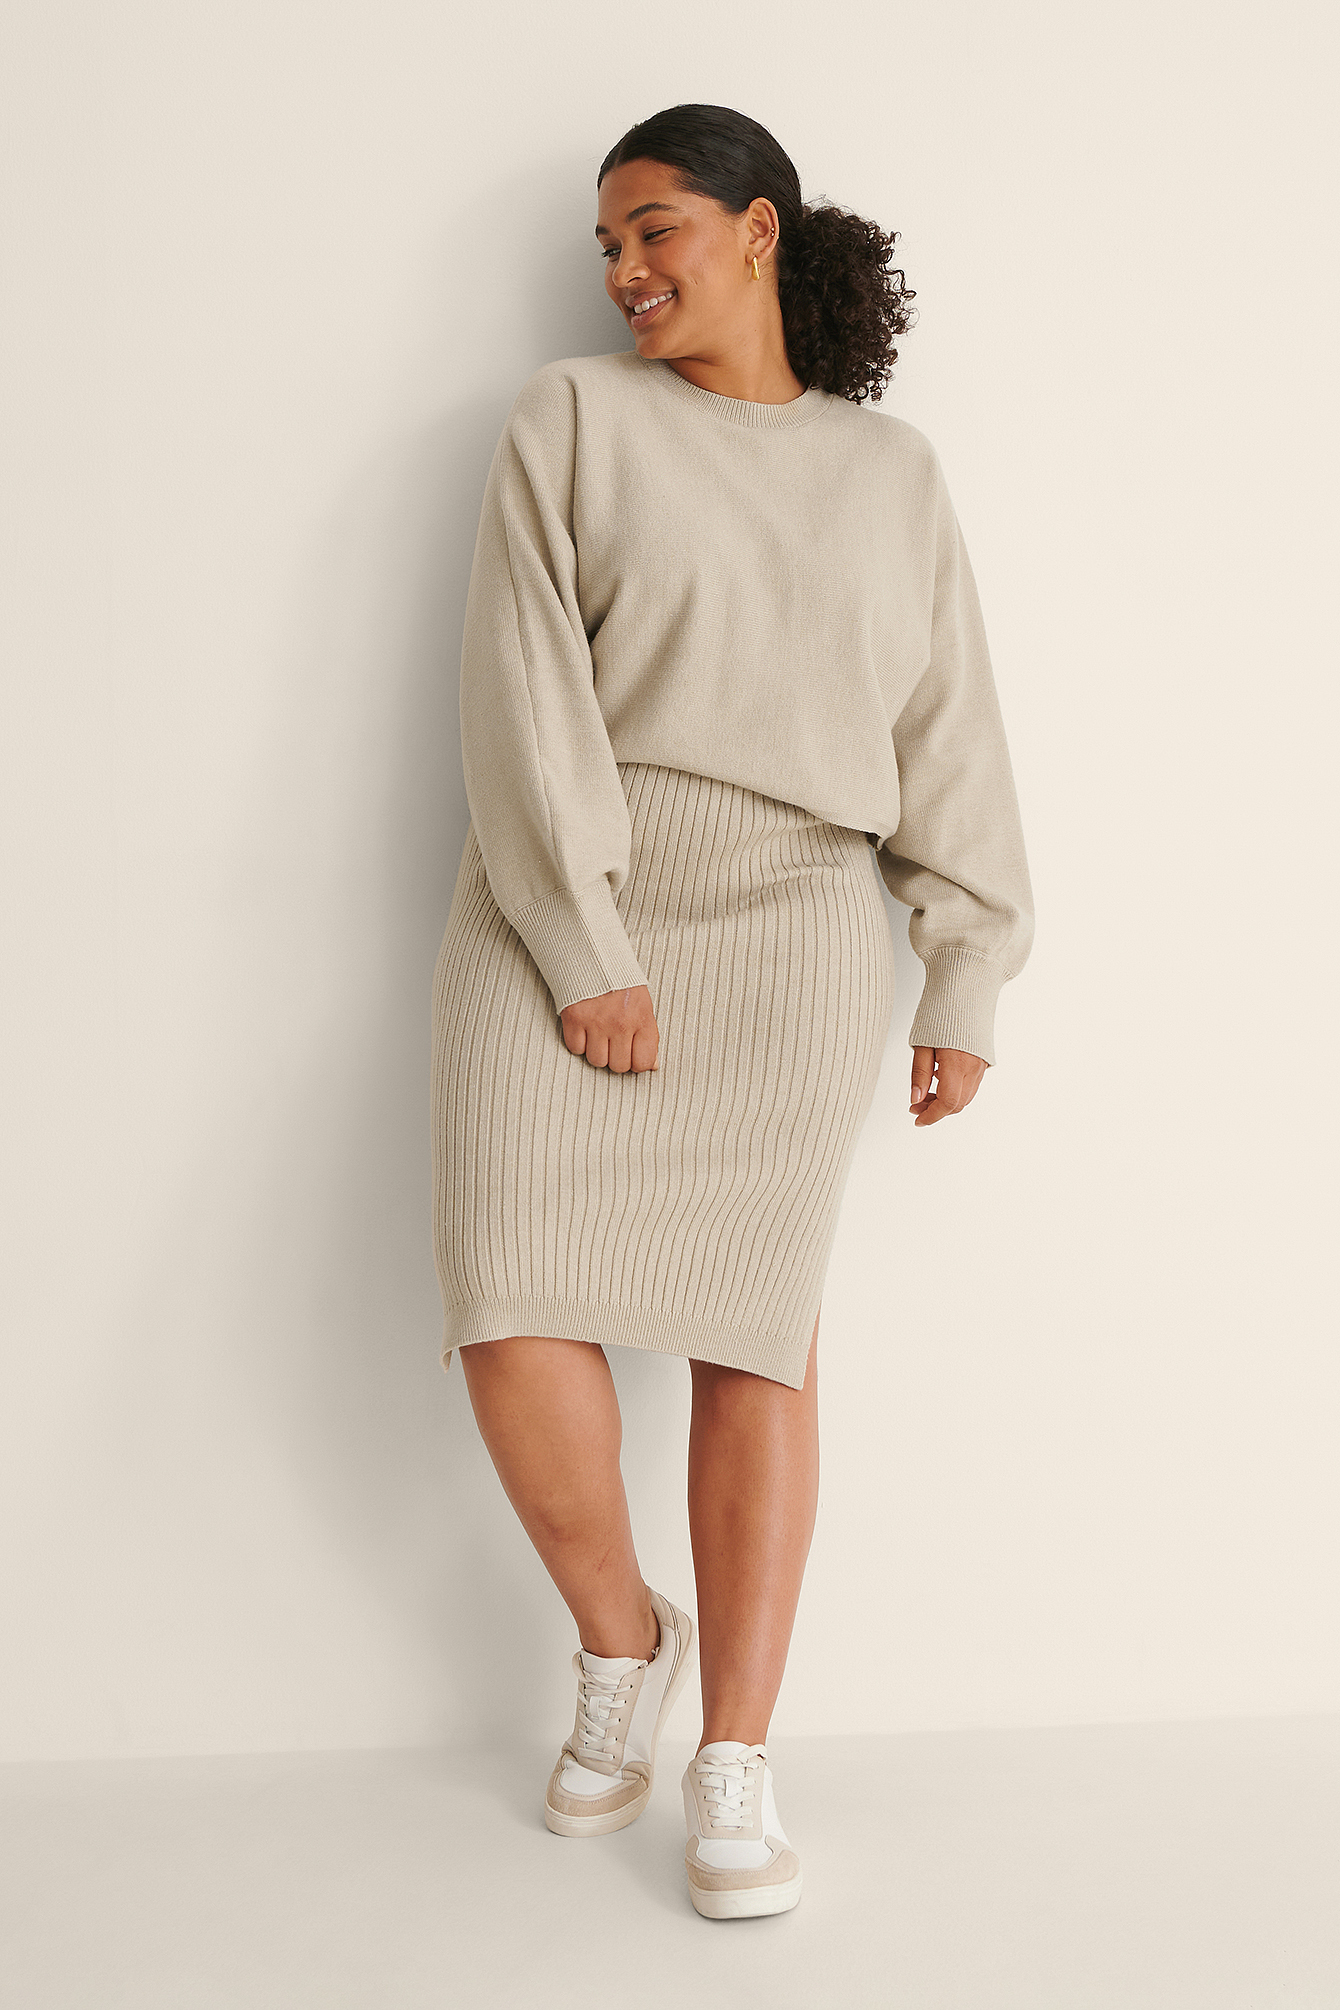 Round Neck Cropped Knitted Sweater Outfit.